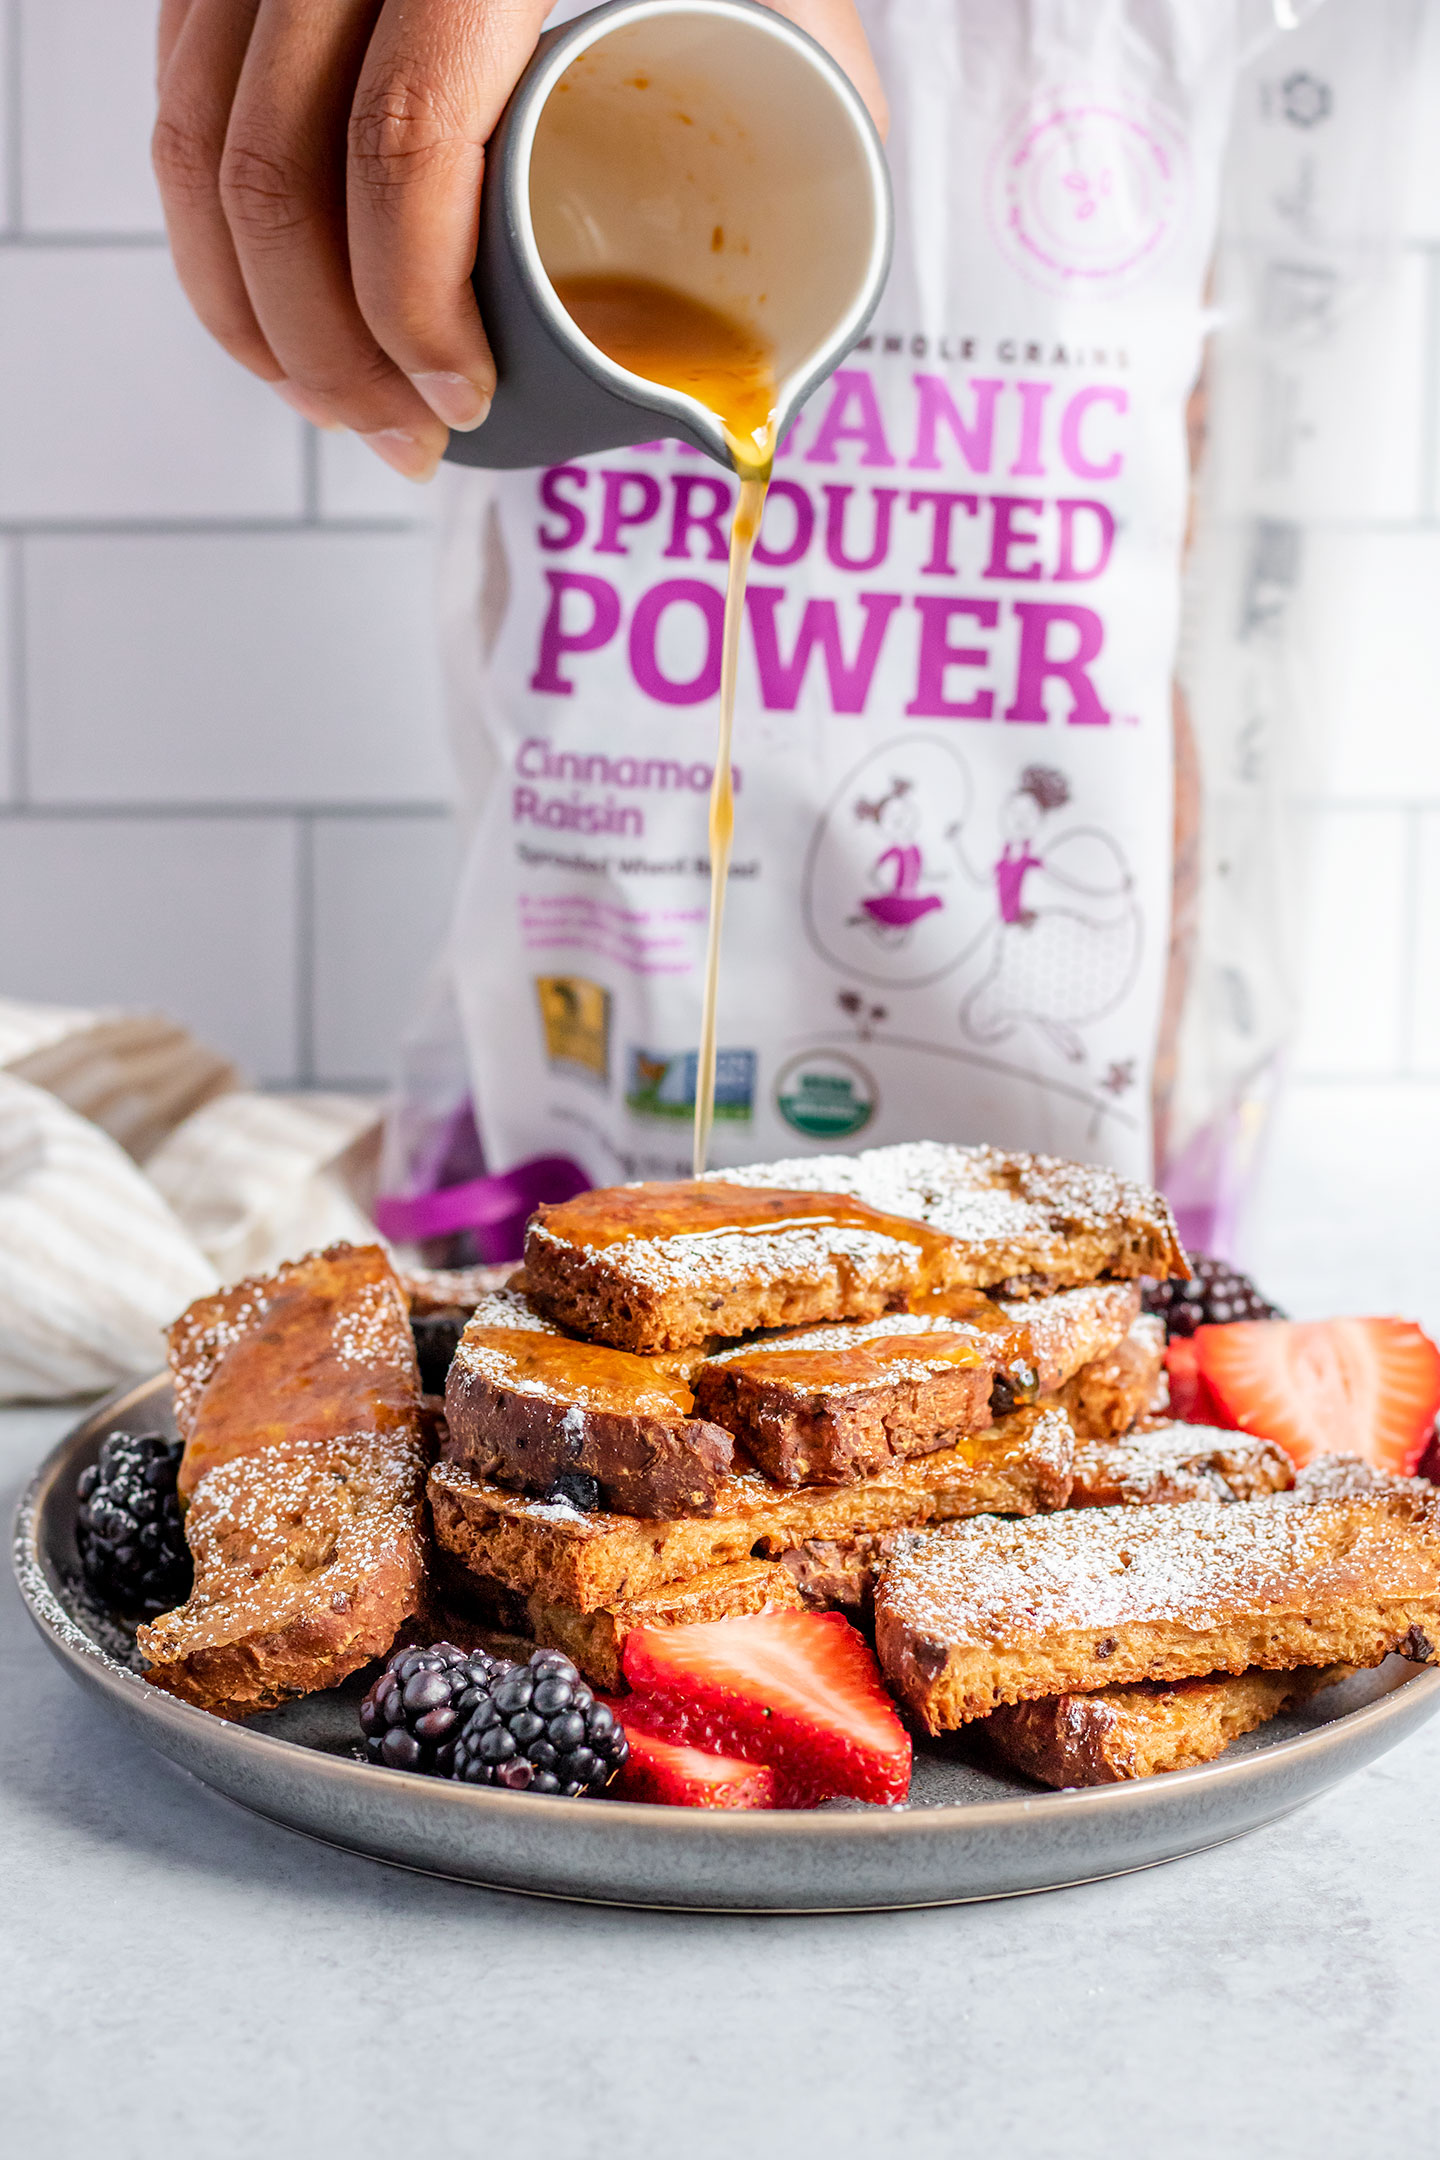 Is Vegan French Toast Healthy?